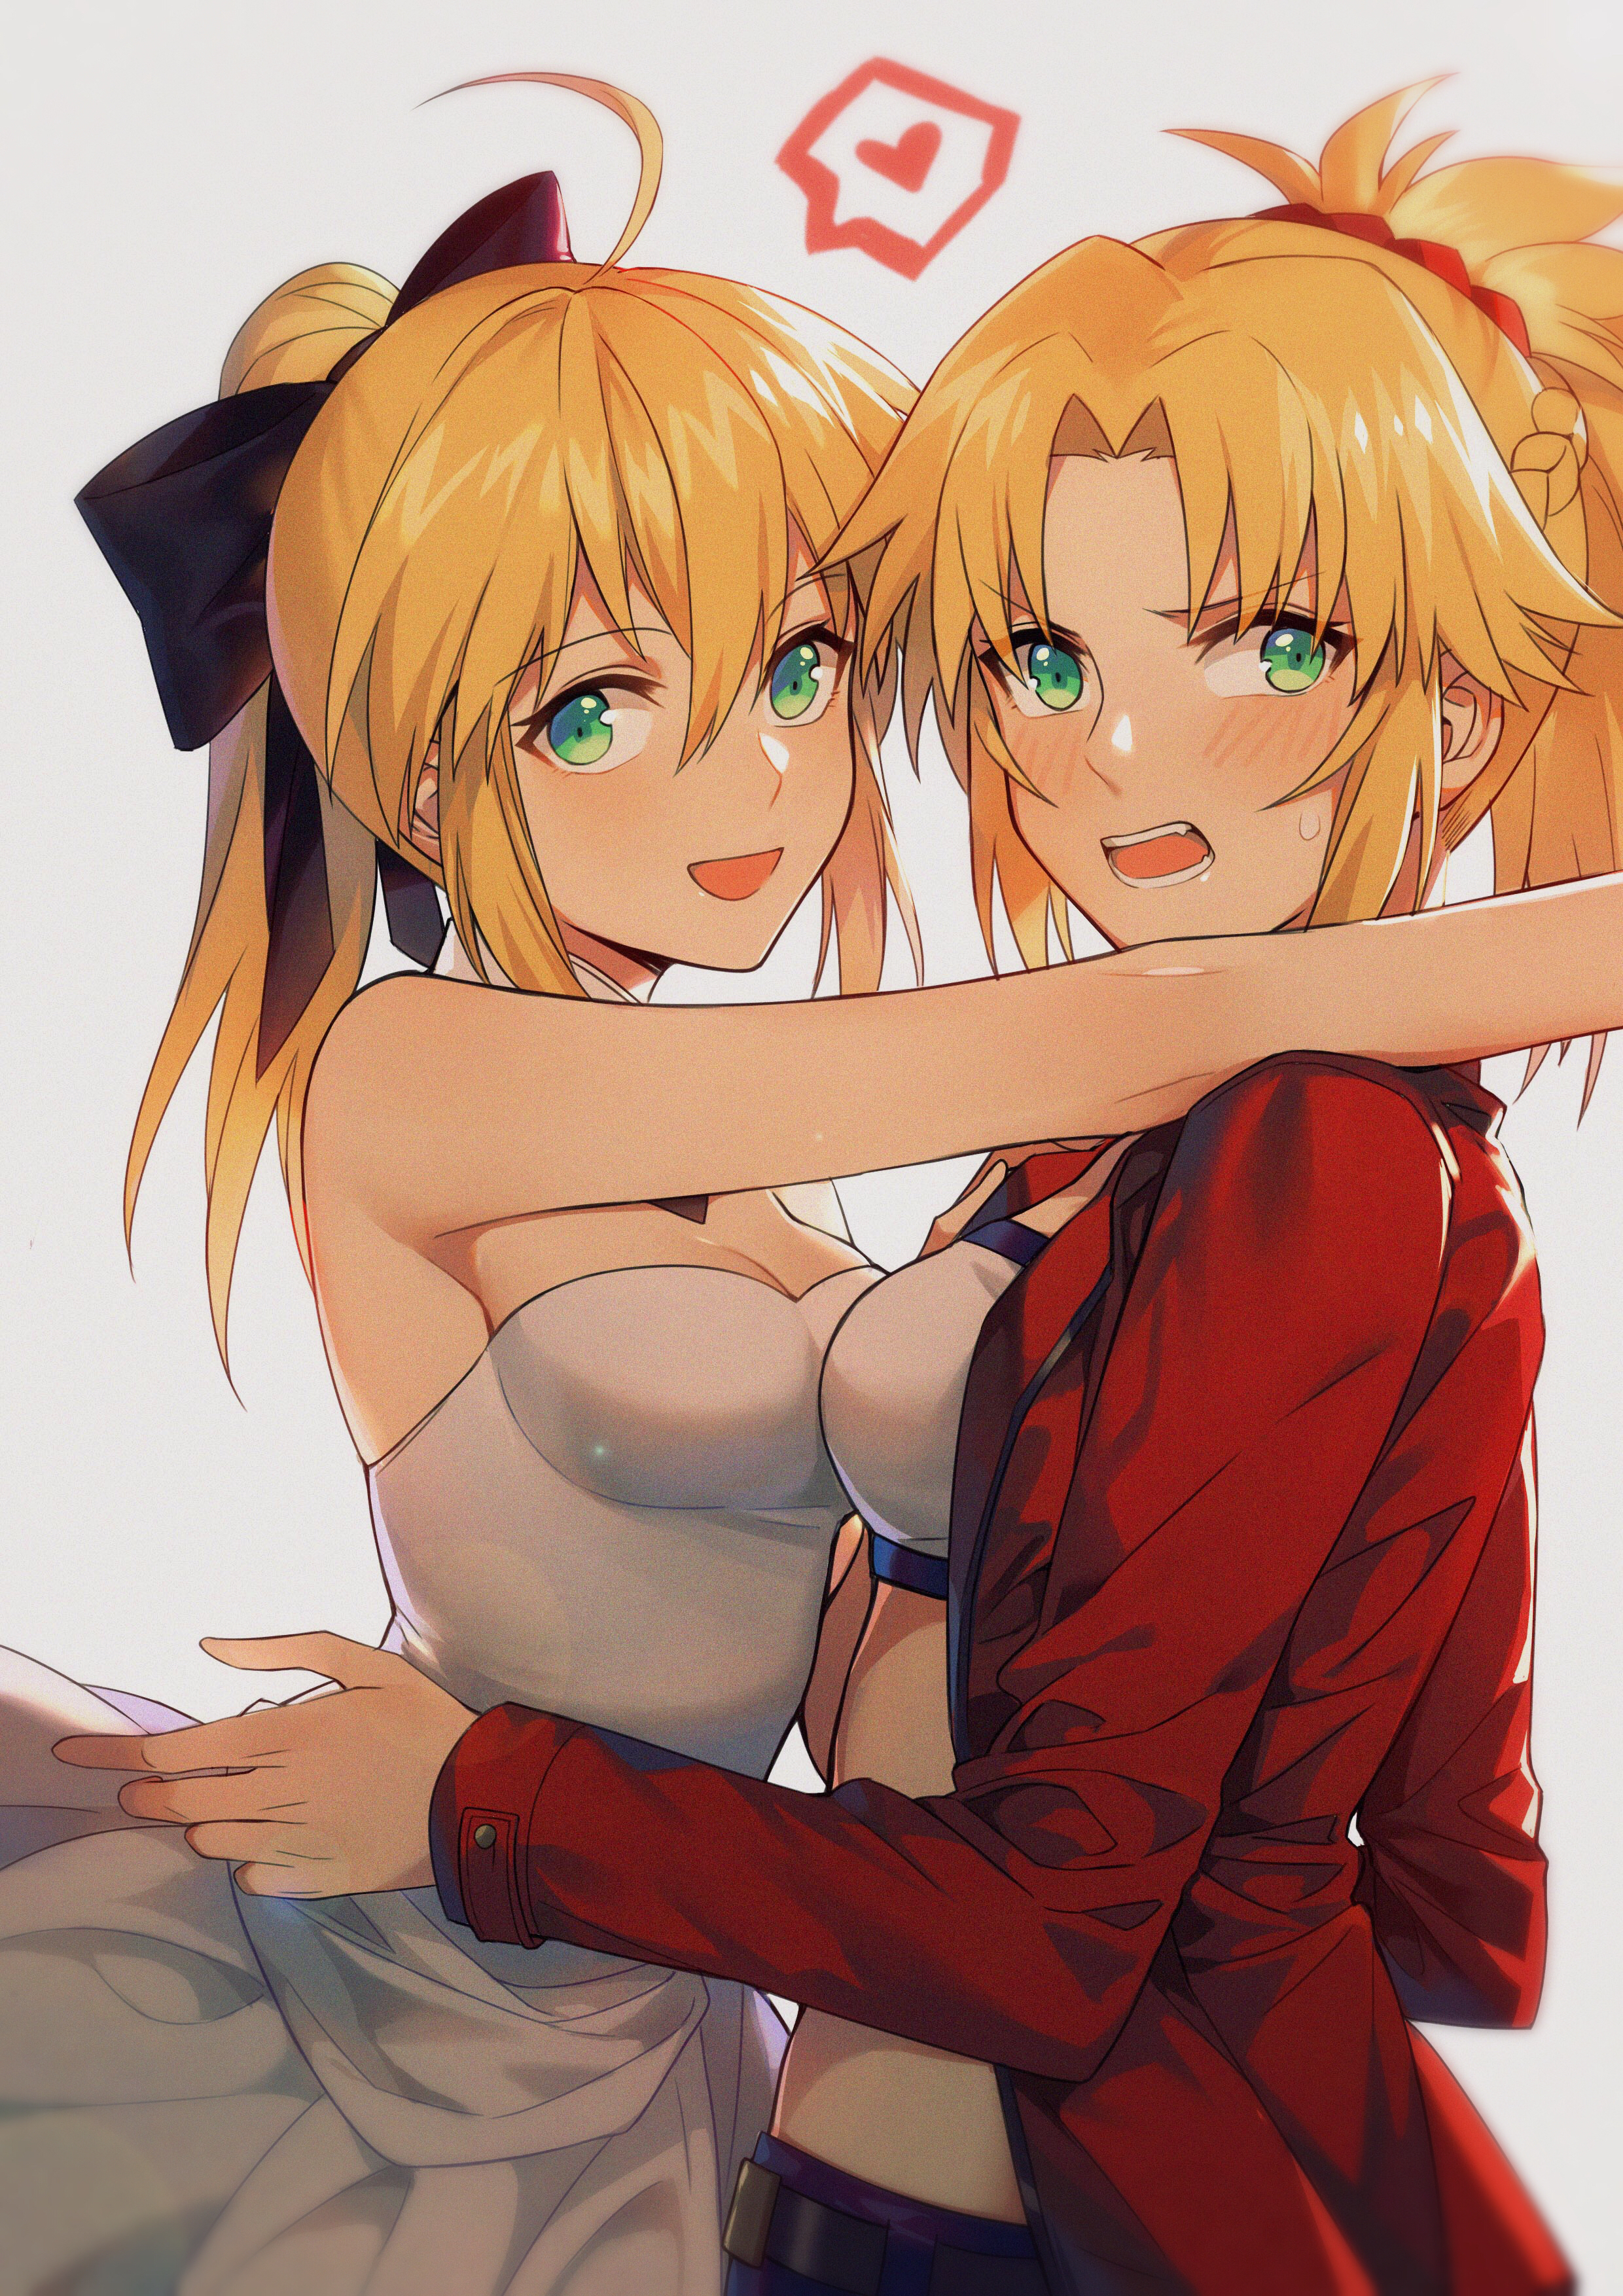 Anime 2480x3508 anime anime girls digital art artwork portrait display 2D Yorukun Fate series Fate/Grand Order Fate/Apocrypha  Fate/Unlimited Codes  Artoria Pendragon Saber Lily Mordred (Fate/Apocrypha) blonde green eyes